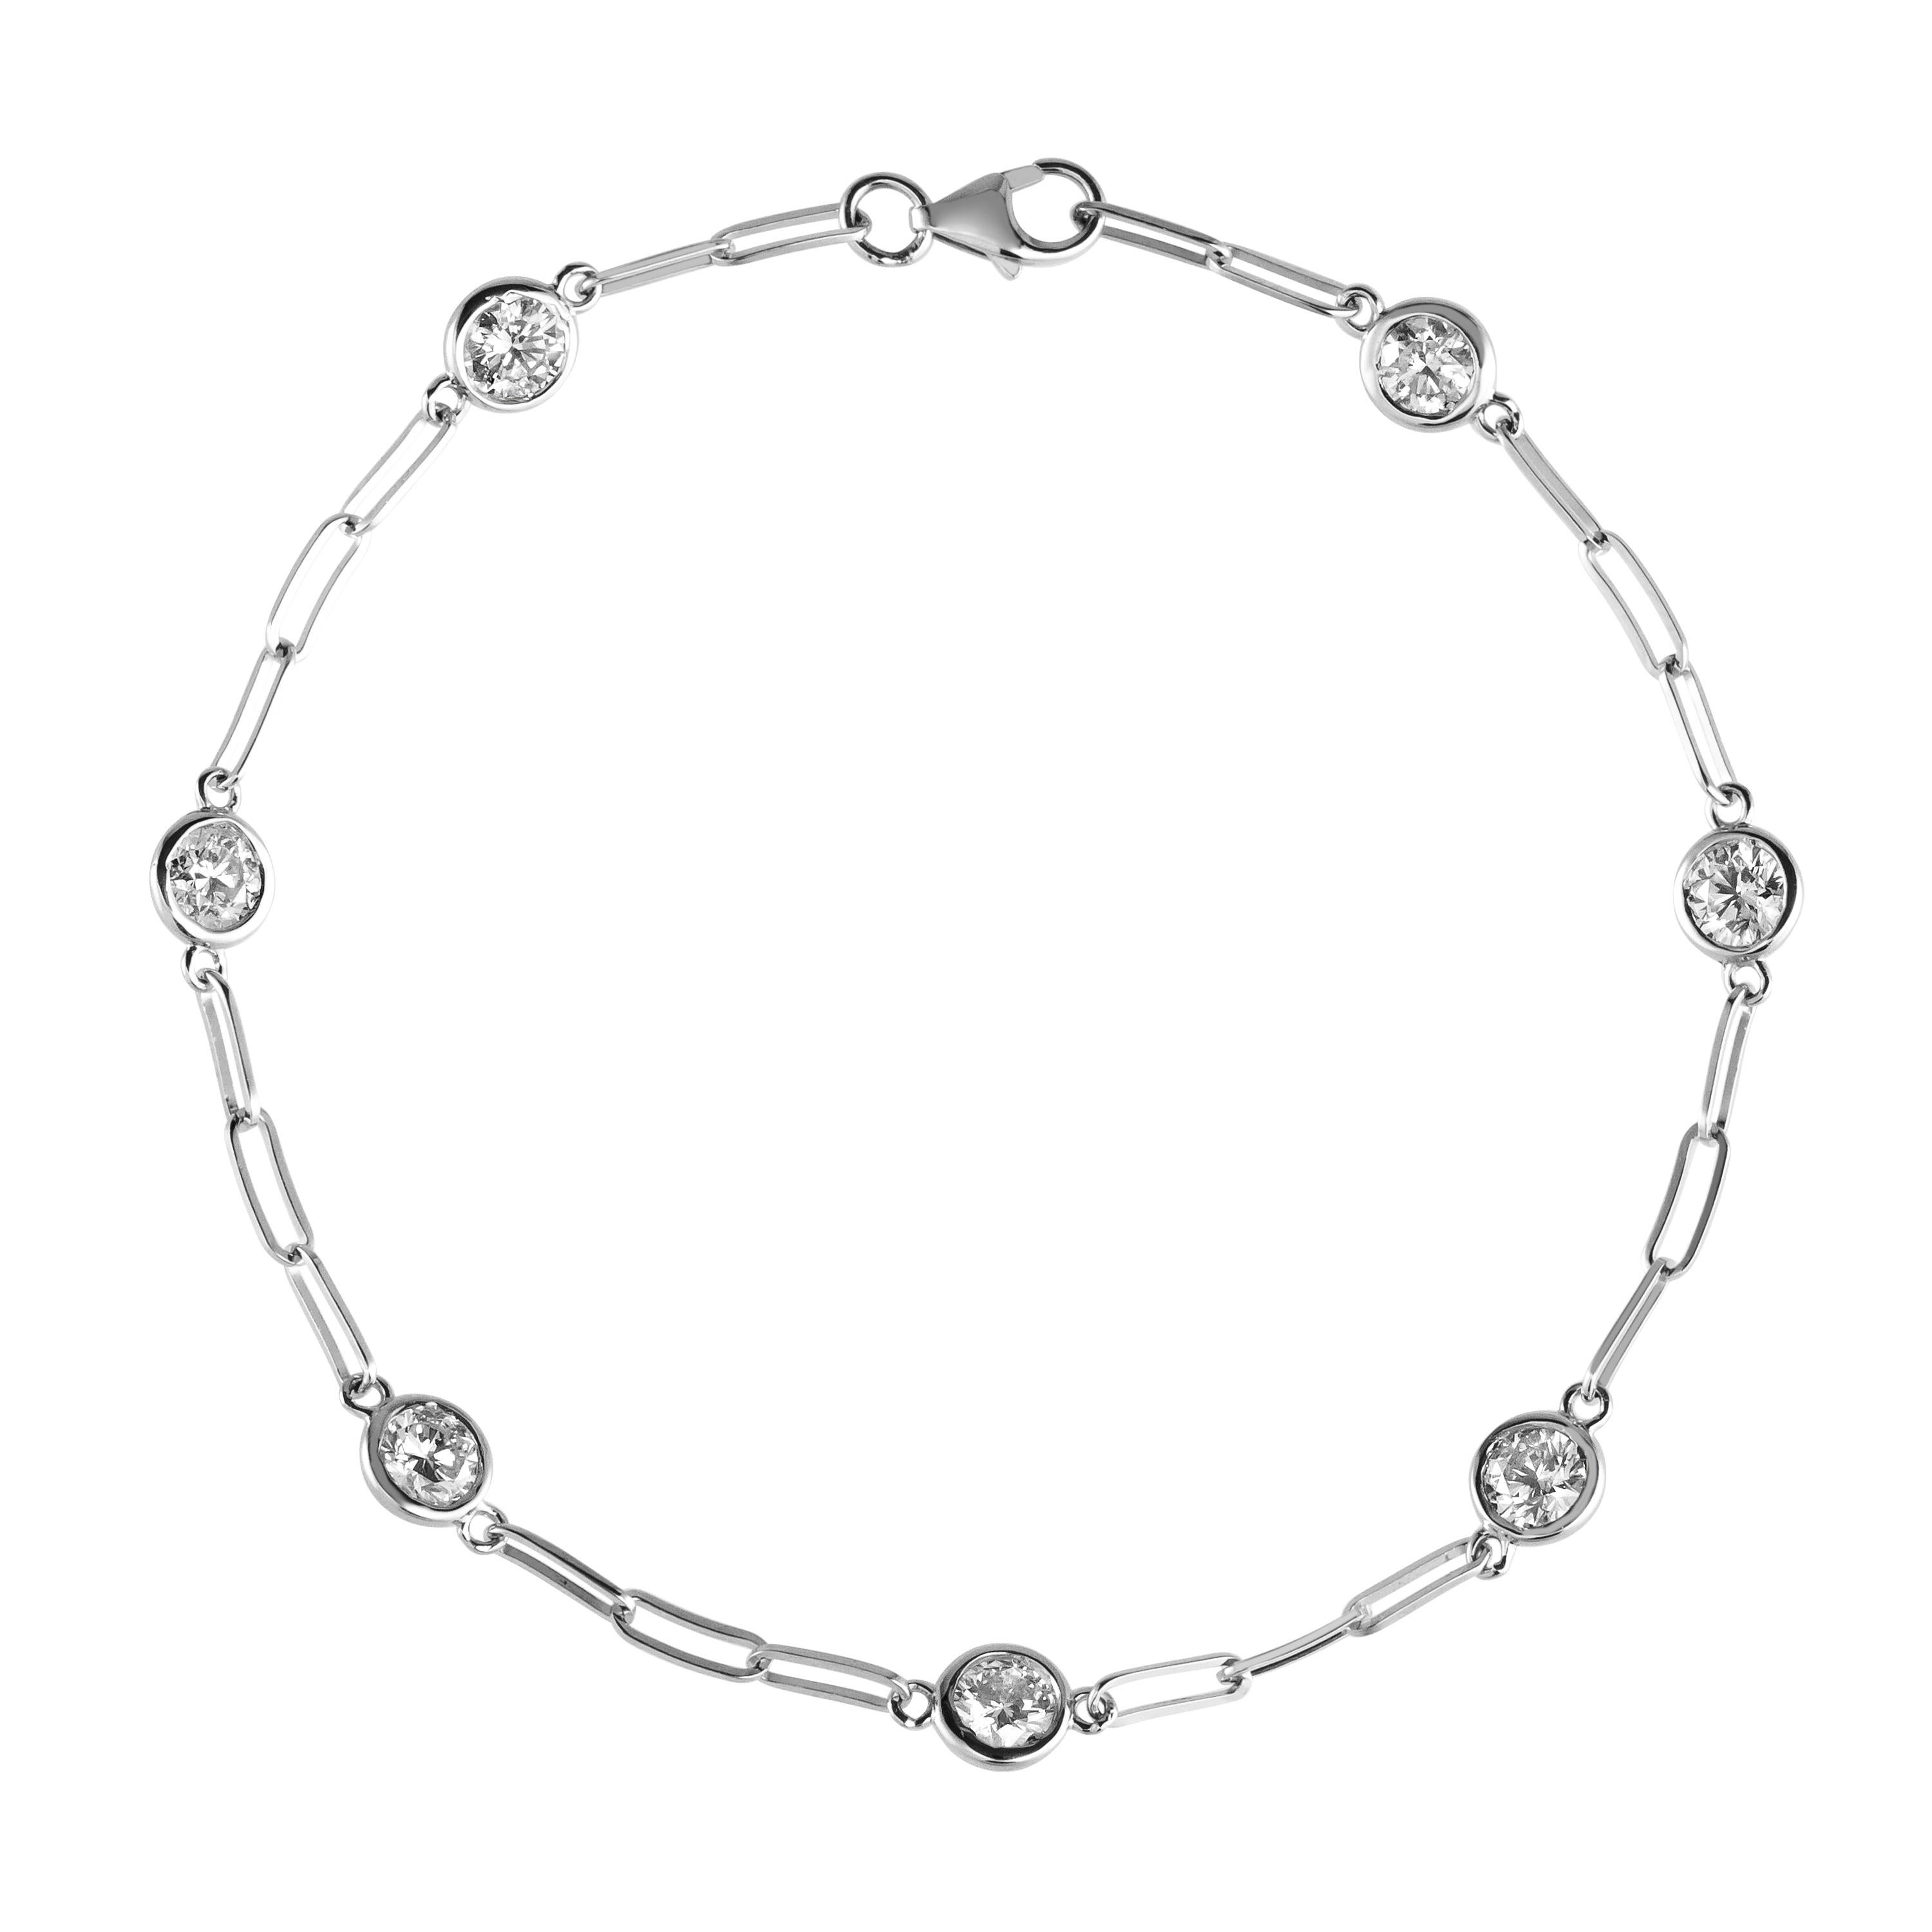 1.00 Carat Natural Diamond Paper Clip Bracelet G SI 14K White Gold 7 inches

 

100% Natural Diamonds, Not Enhanced in any way
1.00CT
G-H 
SI  
14K White Gold, Bezel set, 1.3 grams
7 inches in length, 3/16 inch in width
7 diamonds, each diamond is